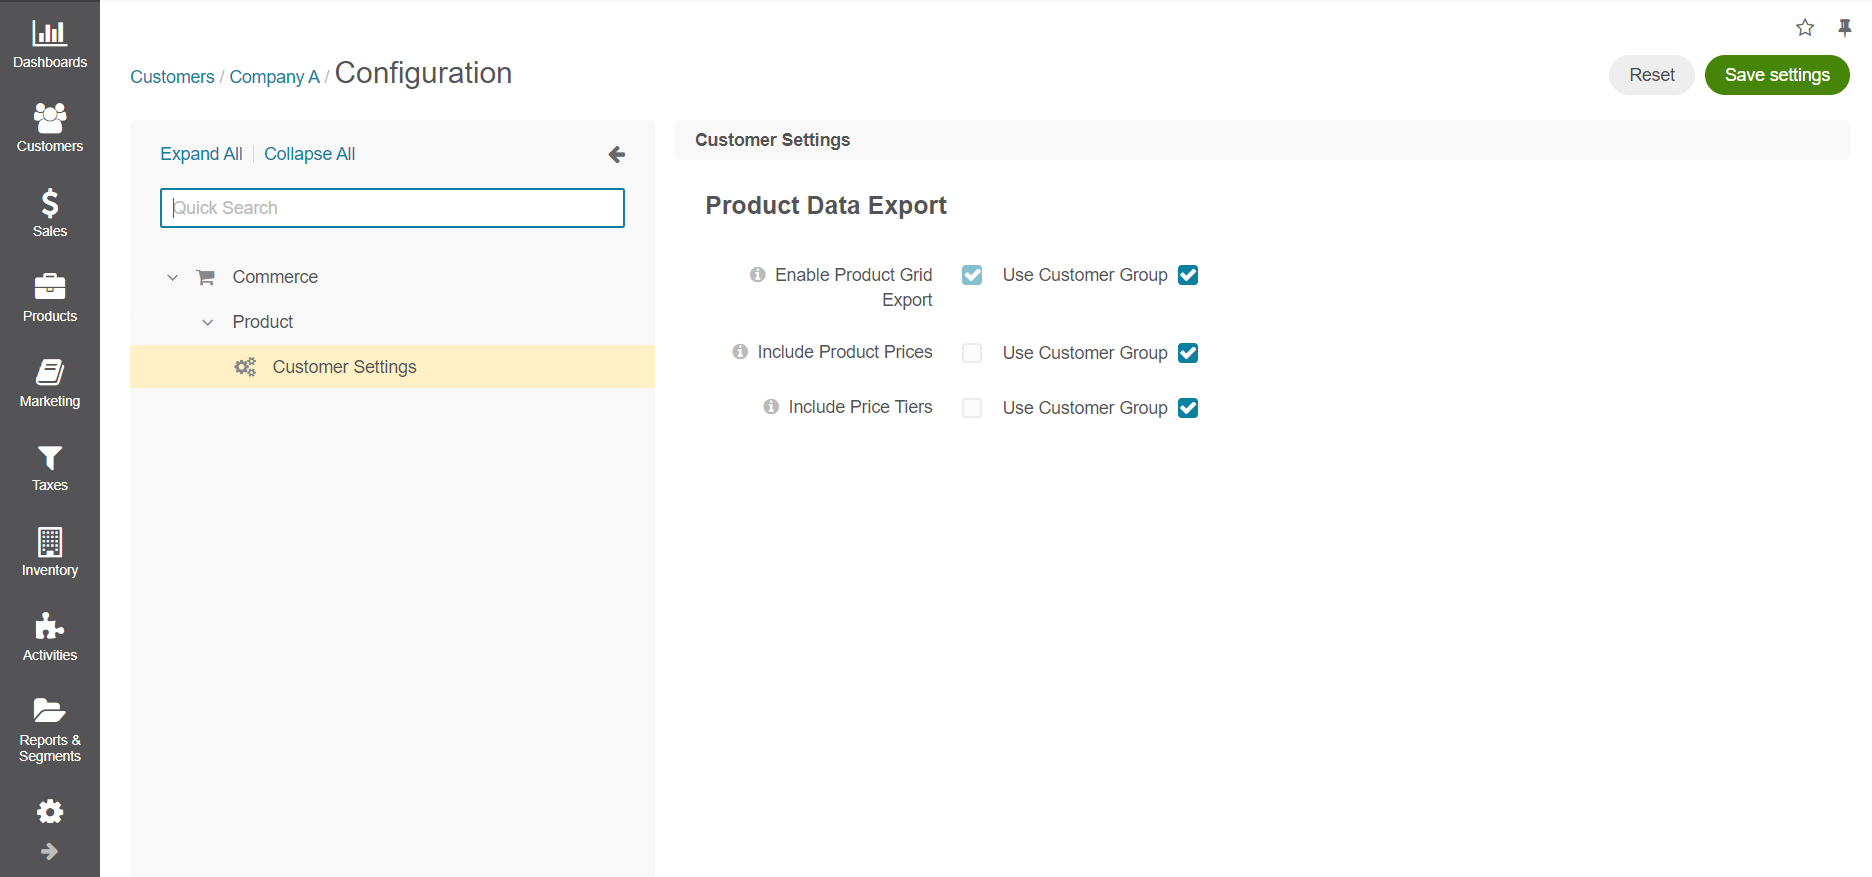 Product data export configuration options on customer level